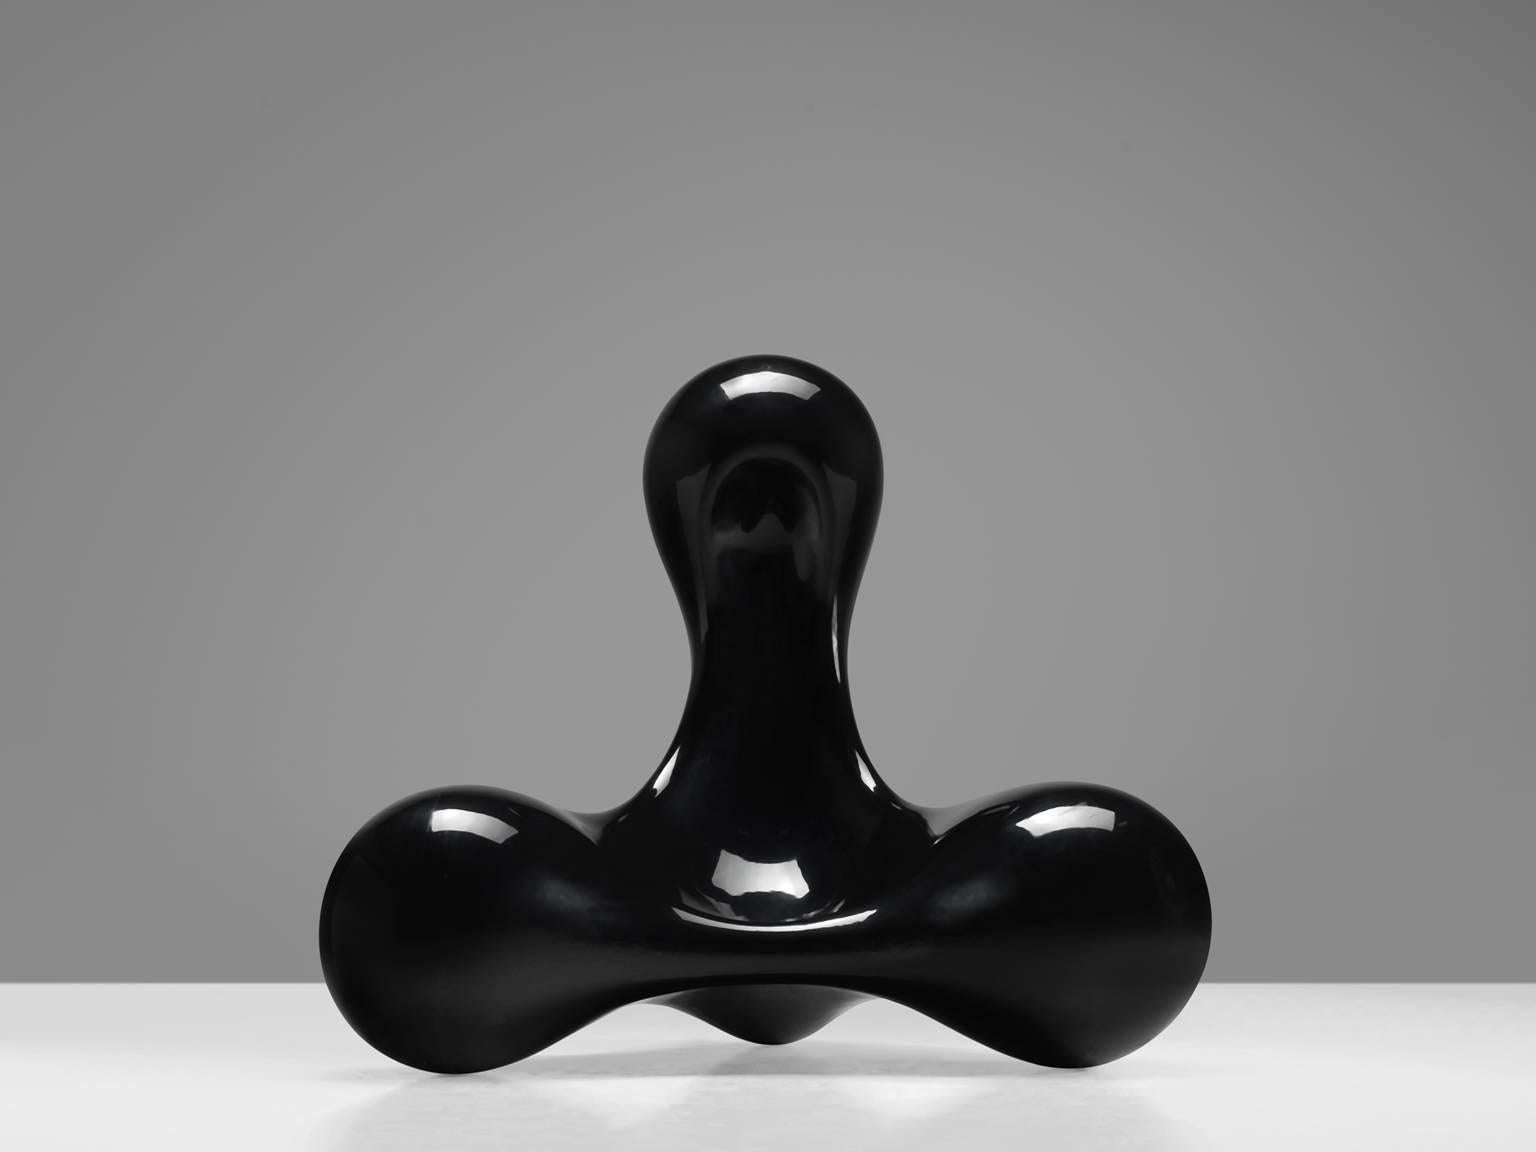 Pieter Kortekaas, chair, fiberglass, the Netherlands, 1976

This chair is designed by the Dutch designer and artist Pieter Kortekaas. This black fiberglass chair is executed in a deep coated black color. The postmodern, playful form is inspired on